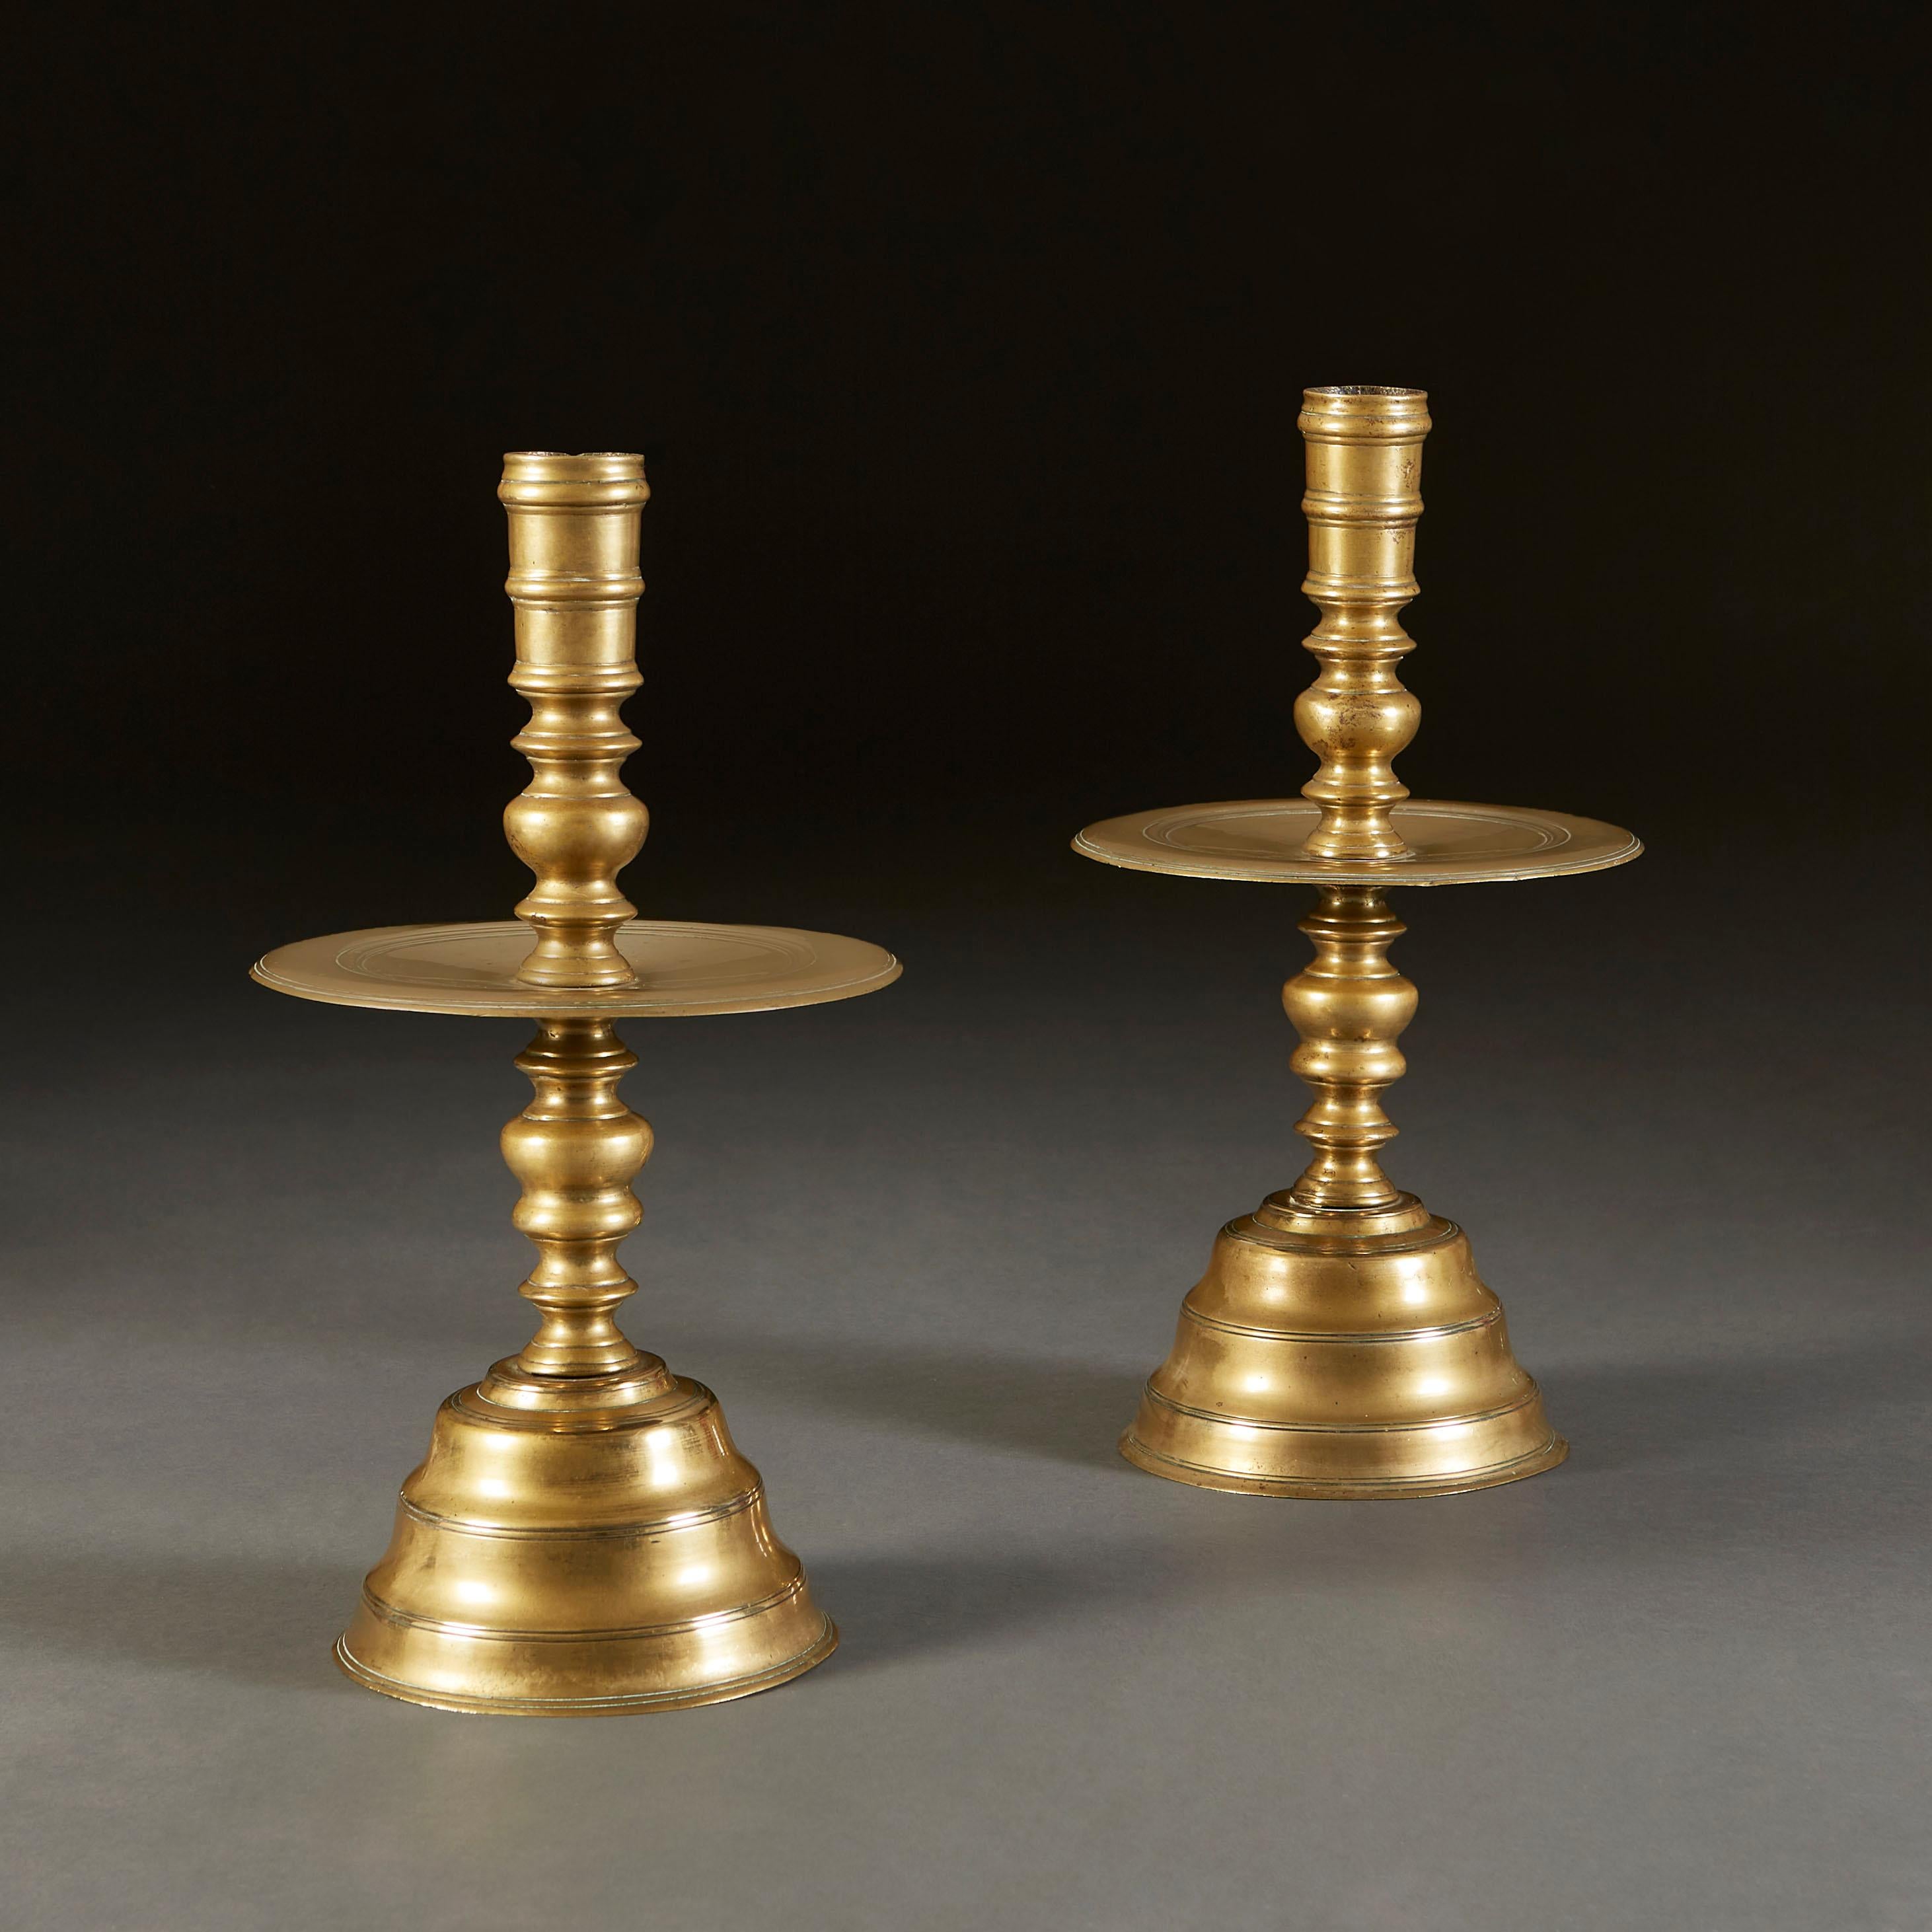 A fine pair of seventeenth century Dutch brass candlesticks, with molded baluster turnings to the column. The candlesticks feature mid mounted drip trays between knopped stem details, atop a stepped base.